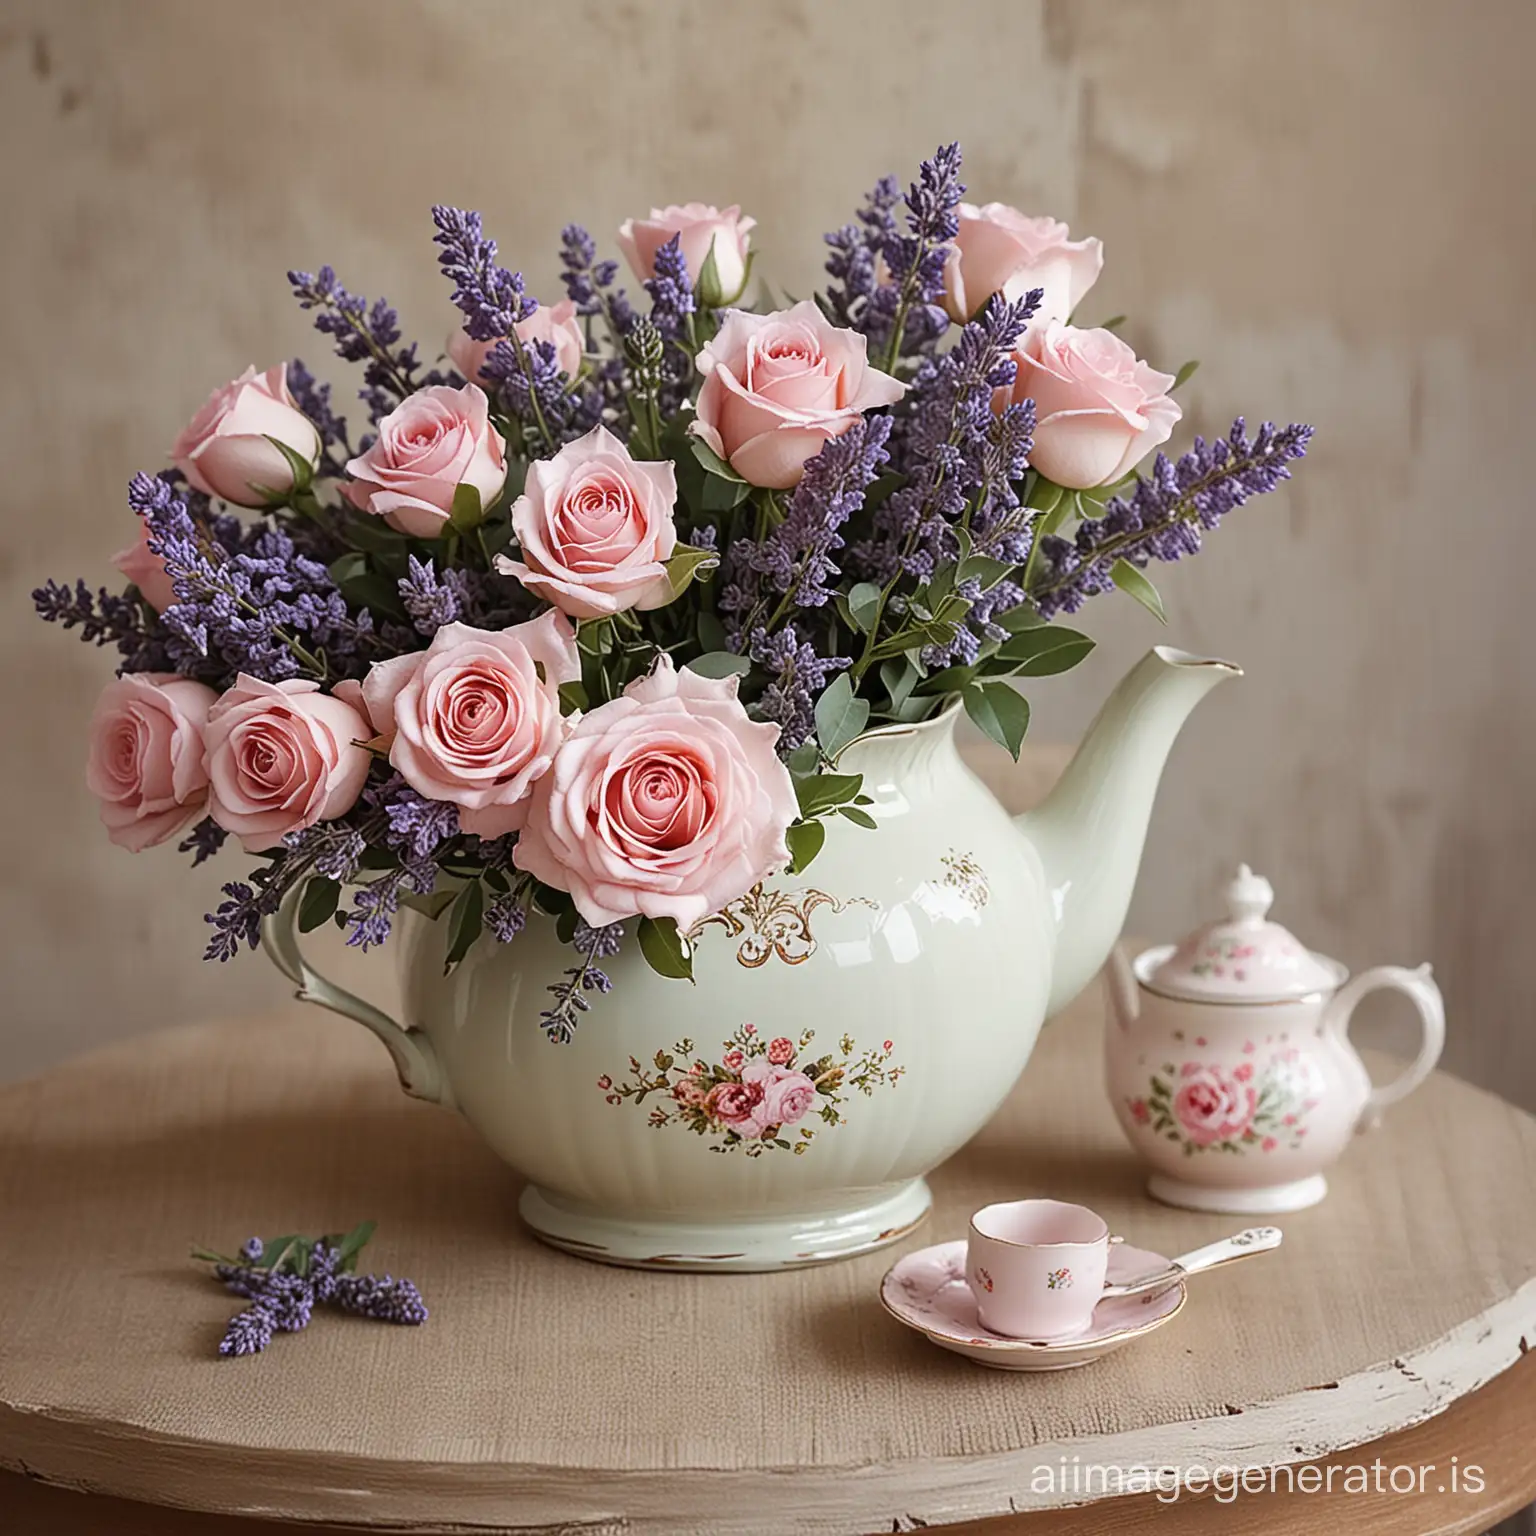 Create an image of a charming centerpiece featuring a small vintage teapot filled with aromatic lavender and soft pink roses. The teapot should appear elegantly aged, with floral or classic patterns enhancing its vintage look. This arrangement should evoke an English garden feel, blending the rustic texture of lavender with the romantic blooms of roses in a harmonious display. The setting should be simple, focusing on the natural beauty and vintage elegance of the centerpiece.